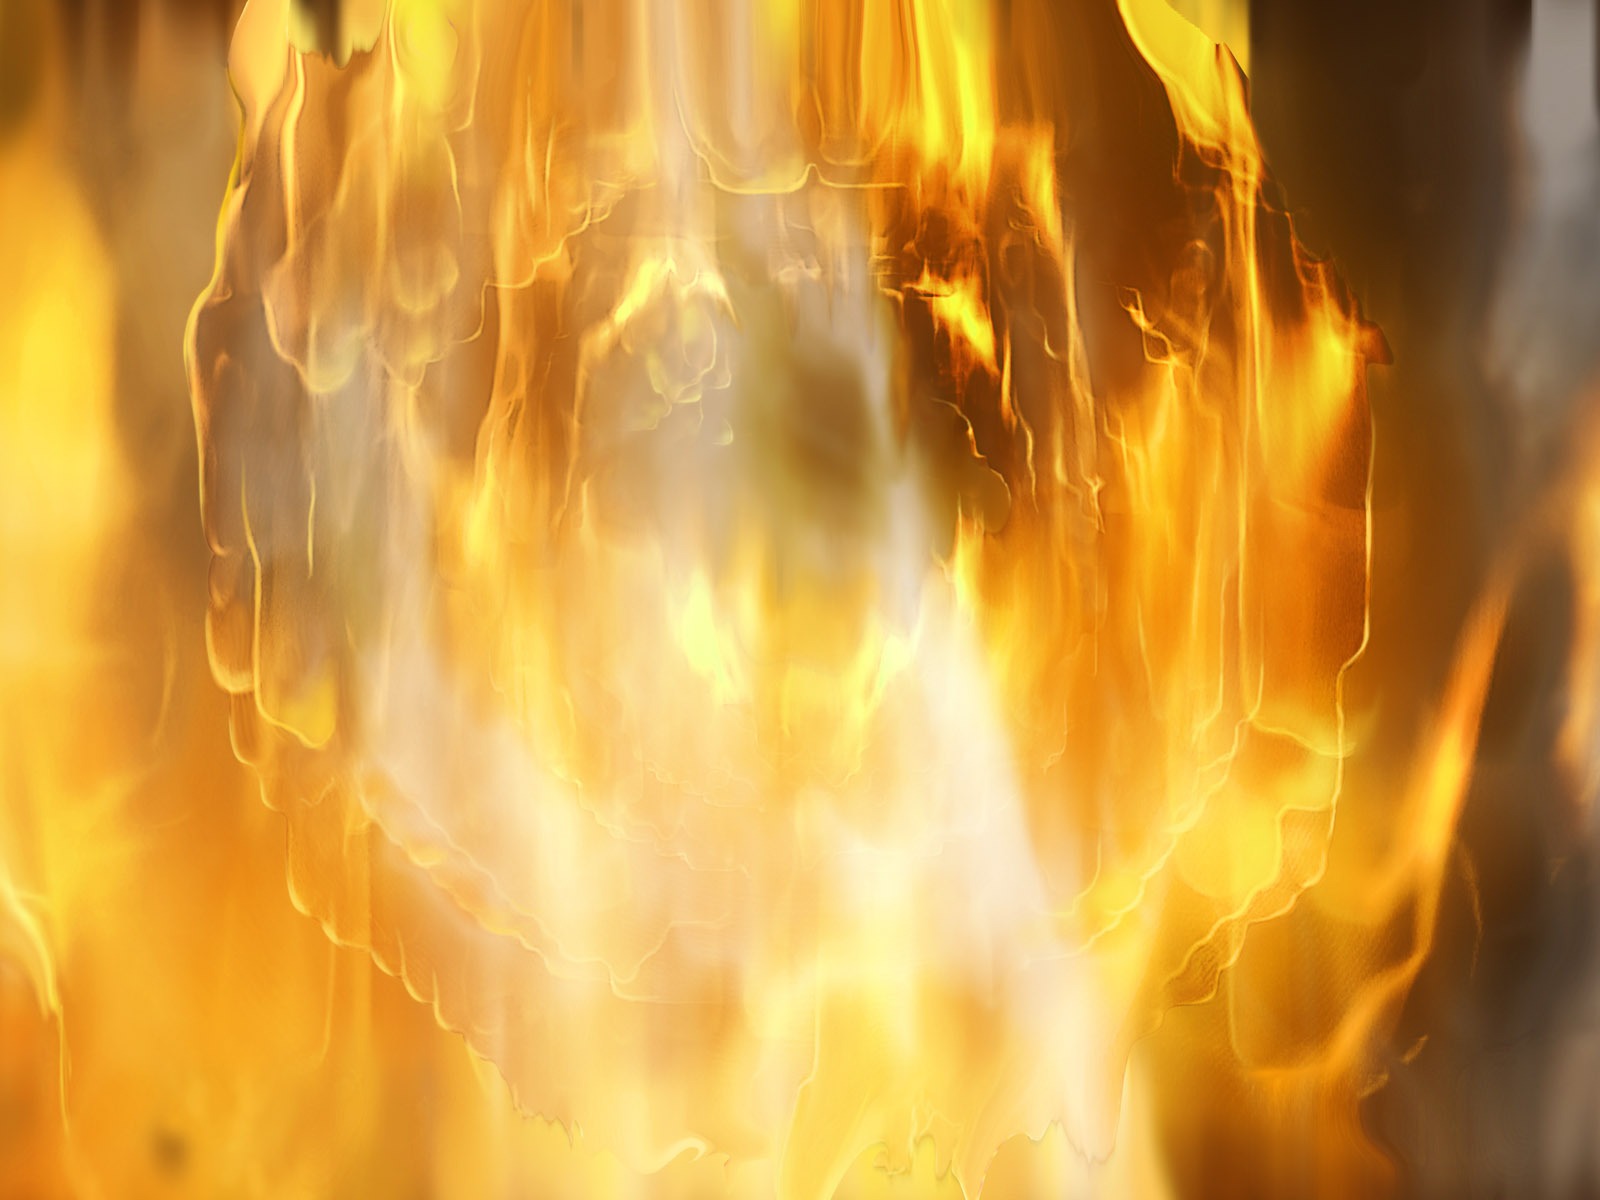 Flame Feature HD Wallpaper #12 - 1600x1200